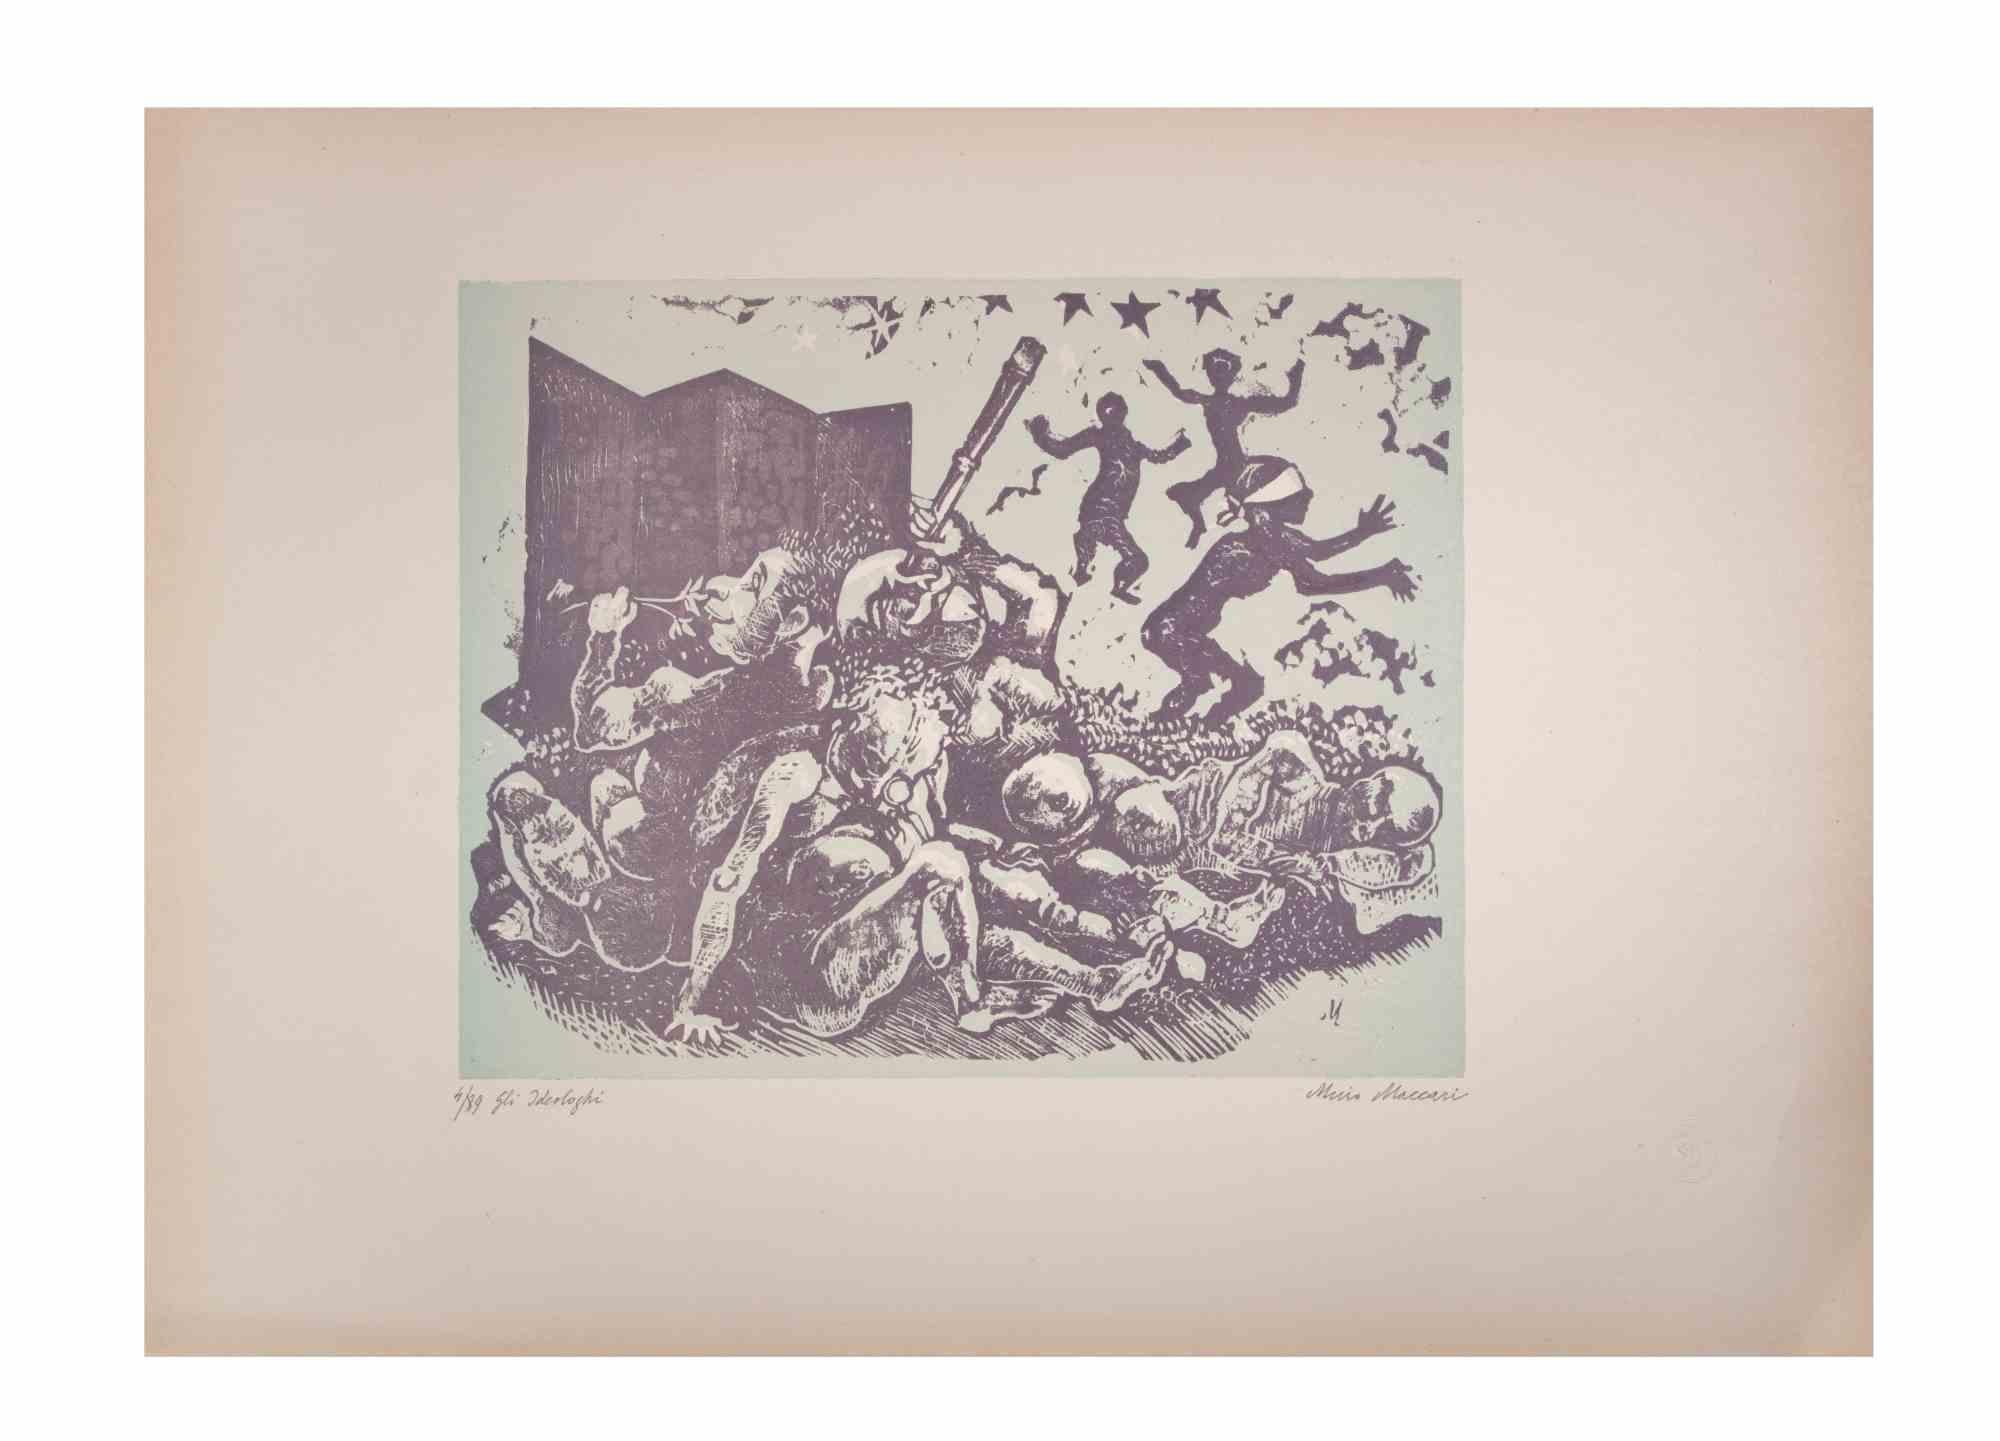 The Ideologues is an Artwork realized by Mino Maccari  (1924-1989) in the Mid-20th Century.

Colored woodcut on paper. Hand-signed on the lower, numbered 4/89 specimens and titled on the left margin.

Good conditions.

Mino Maccari (Siena,